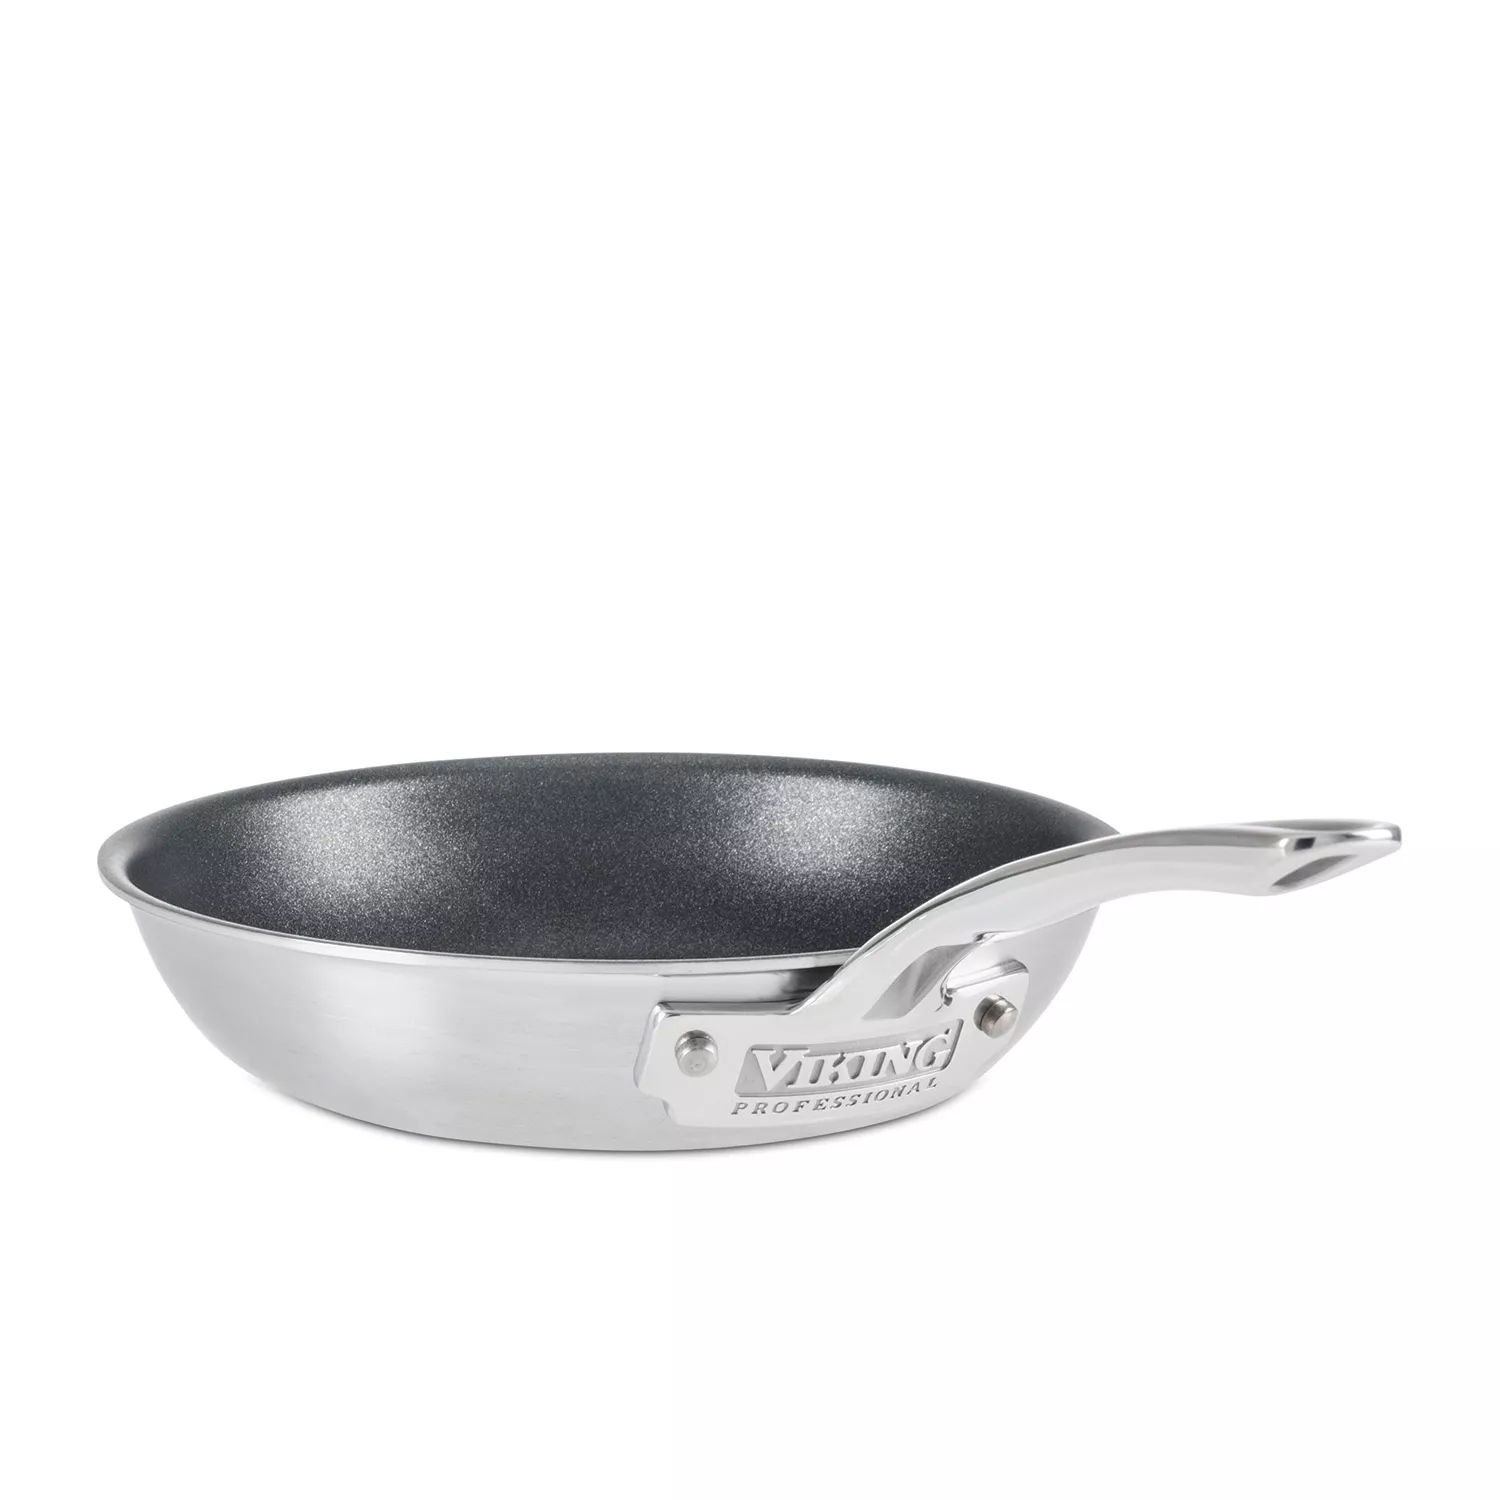 Photos - Pan VIKING Professional 5-Ply Stainless Steel Nonstick Skillet 4015-1N18S 